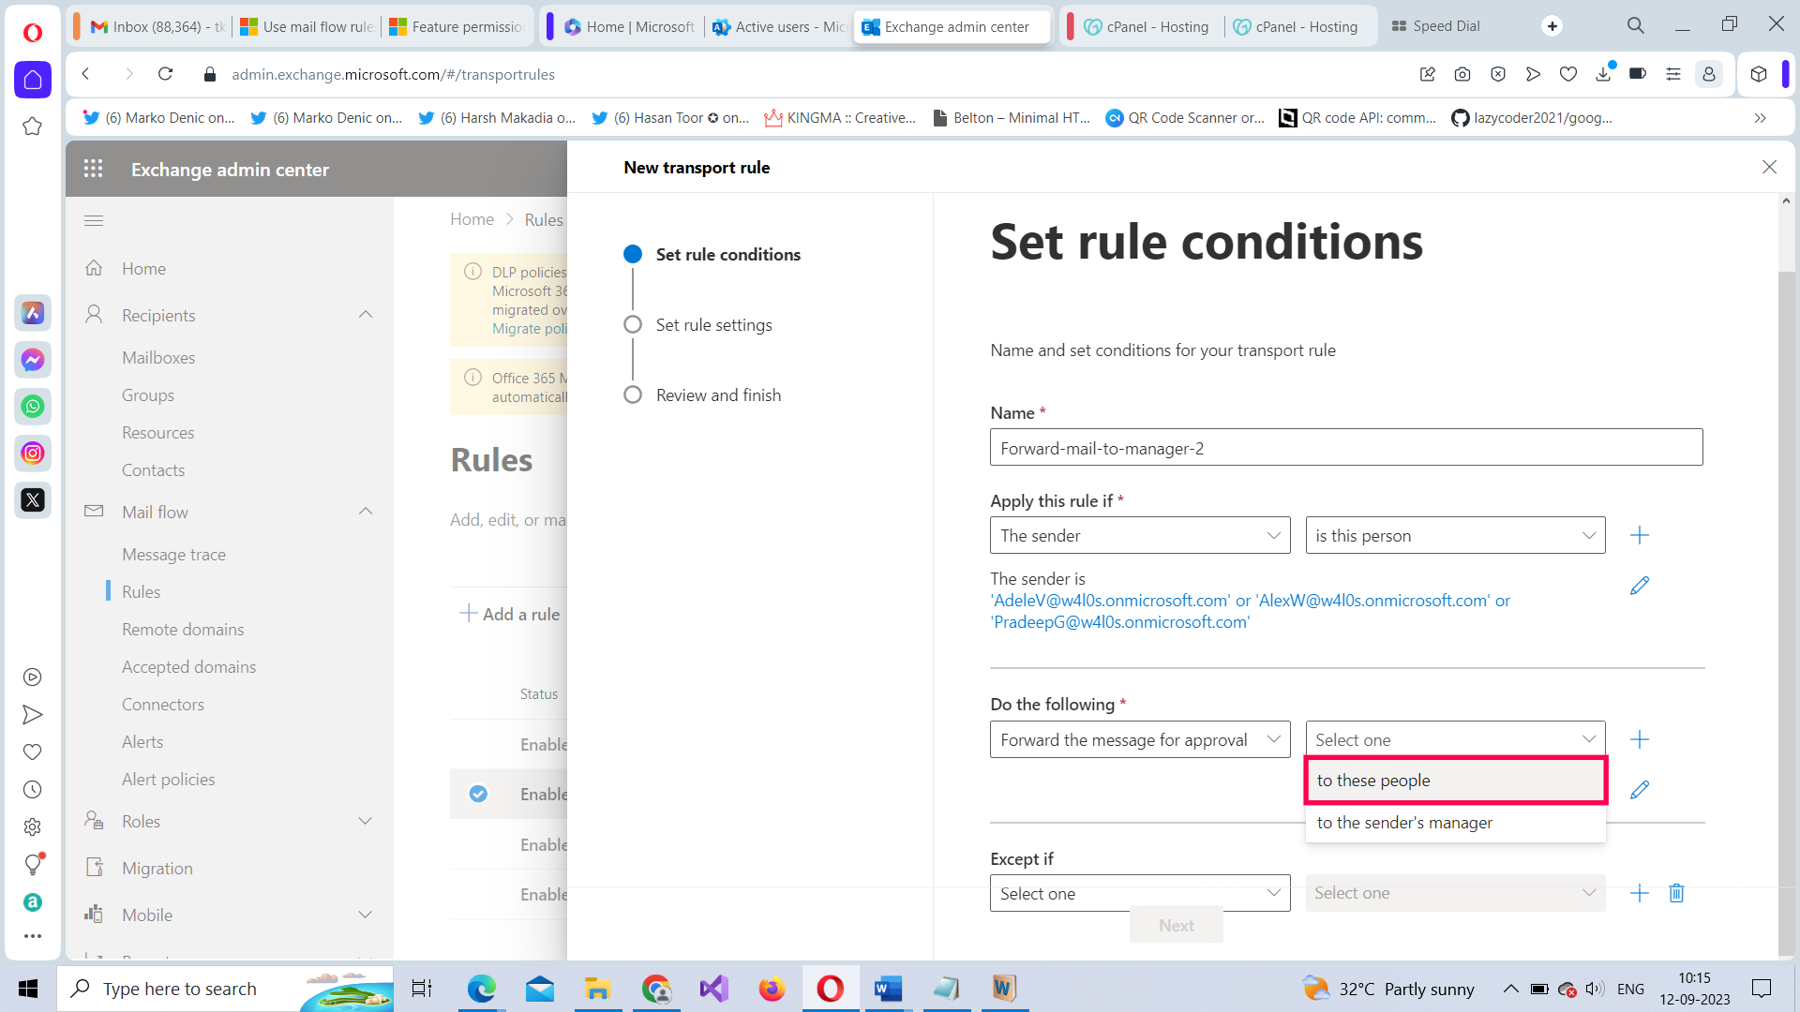 This screenshot shows how you can set the actions for the Microsoft 365 mail flow rule in the Microsoft 365 Exchange admin center. The action highlighted is Forward the message for approval to these people. 